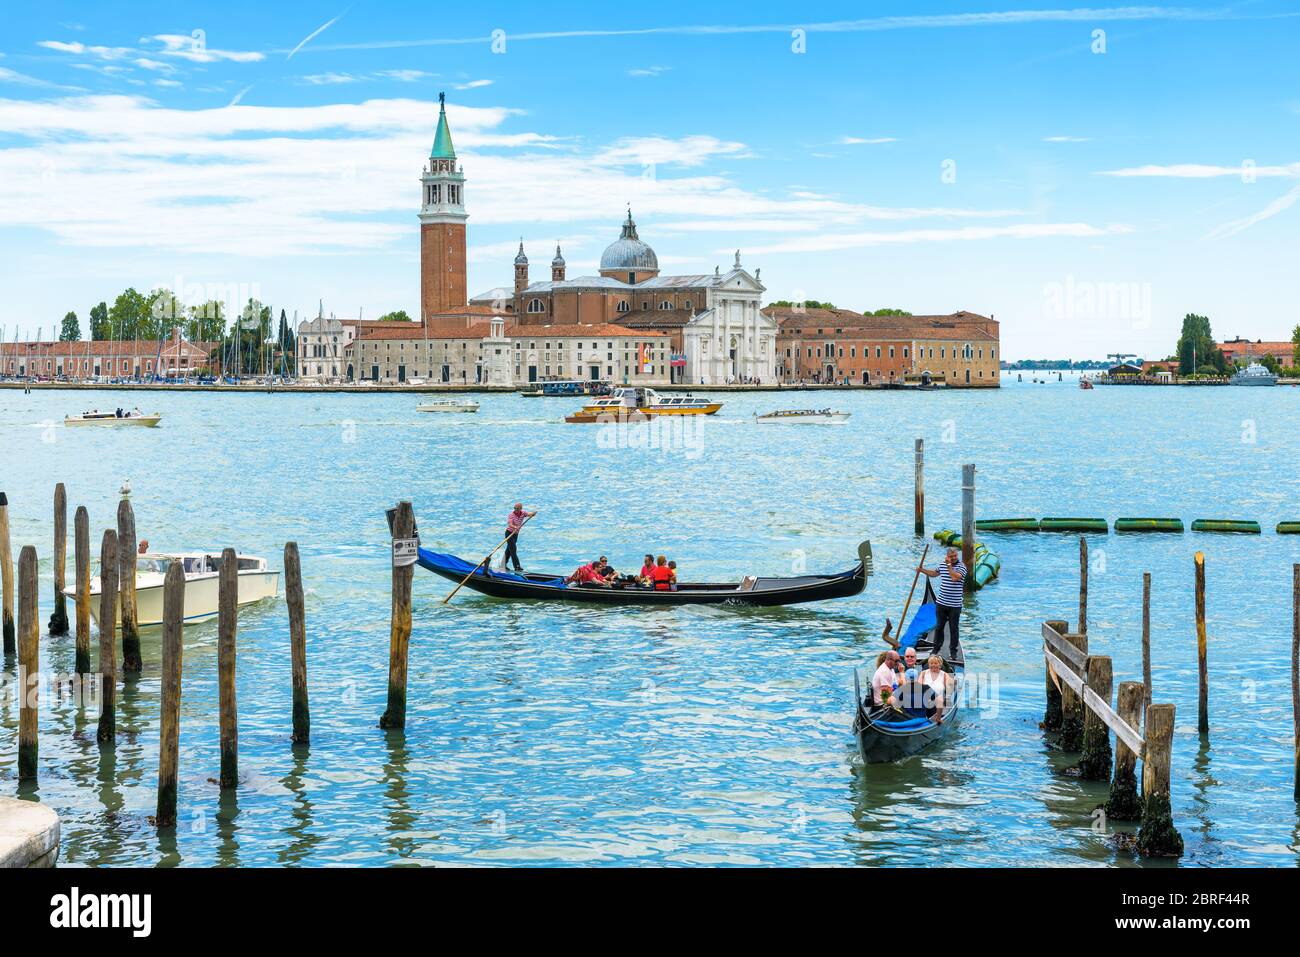 Venice, Italy - May 21, 2017: Gondolas with tourists are sailing along the Venetian lagoon. San Giorgio Maggiore in the background. The gondola is the Stock Photo